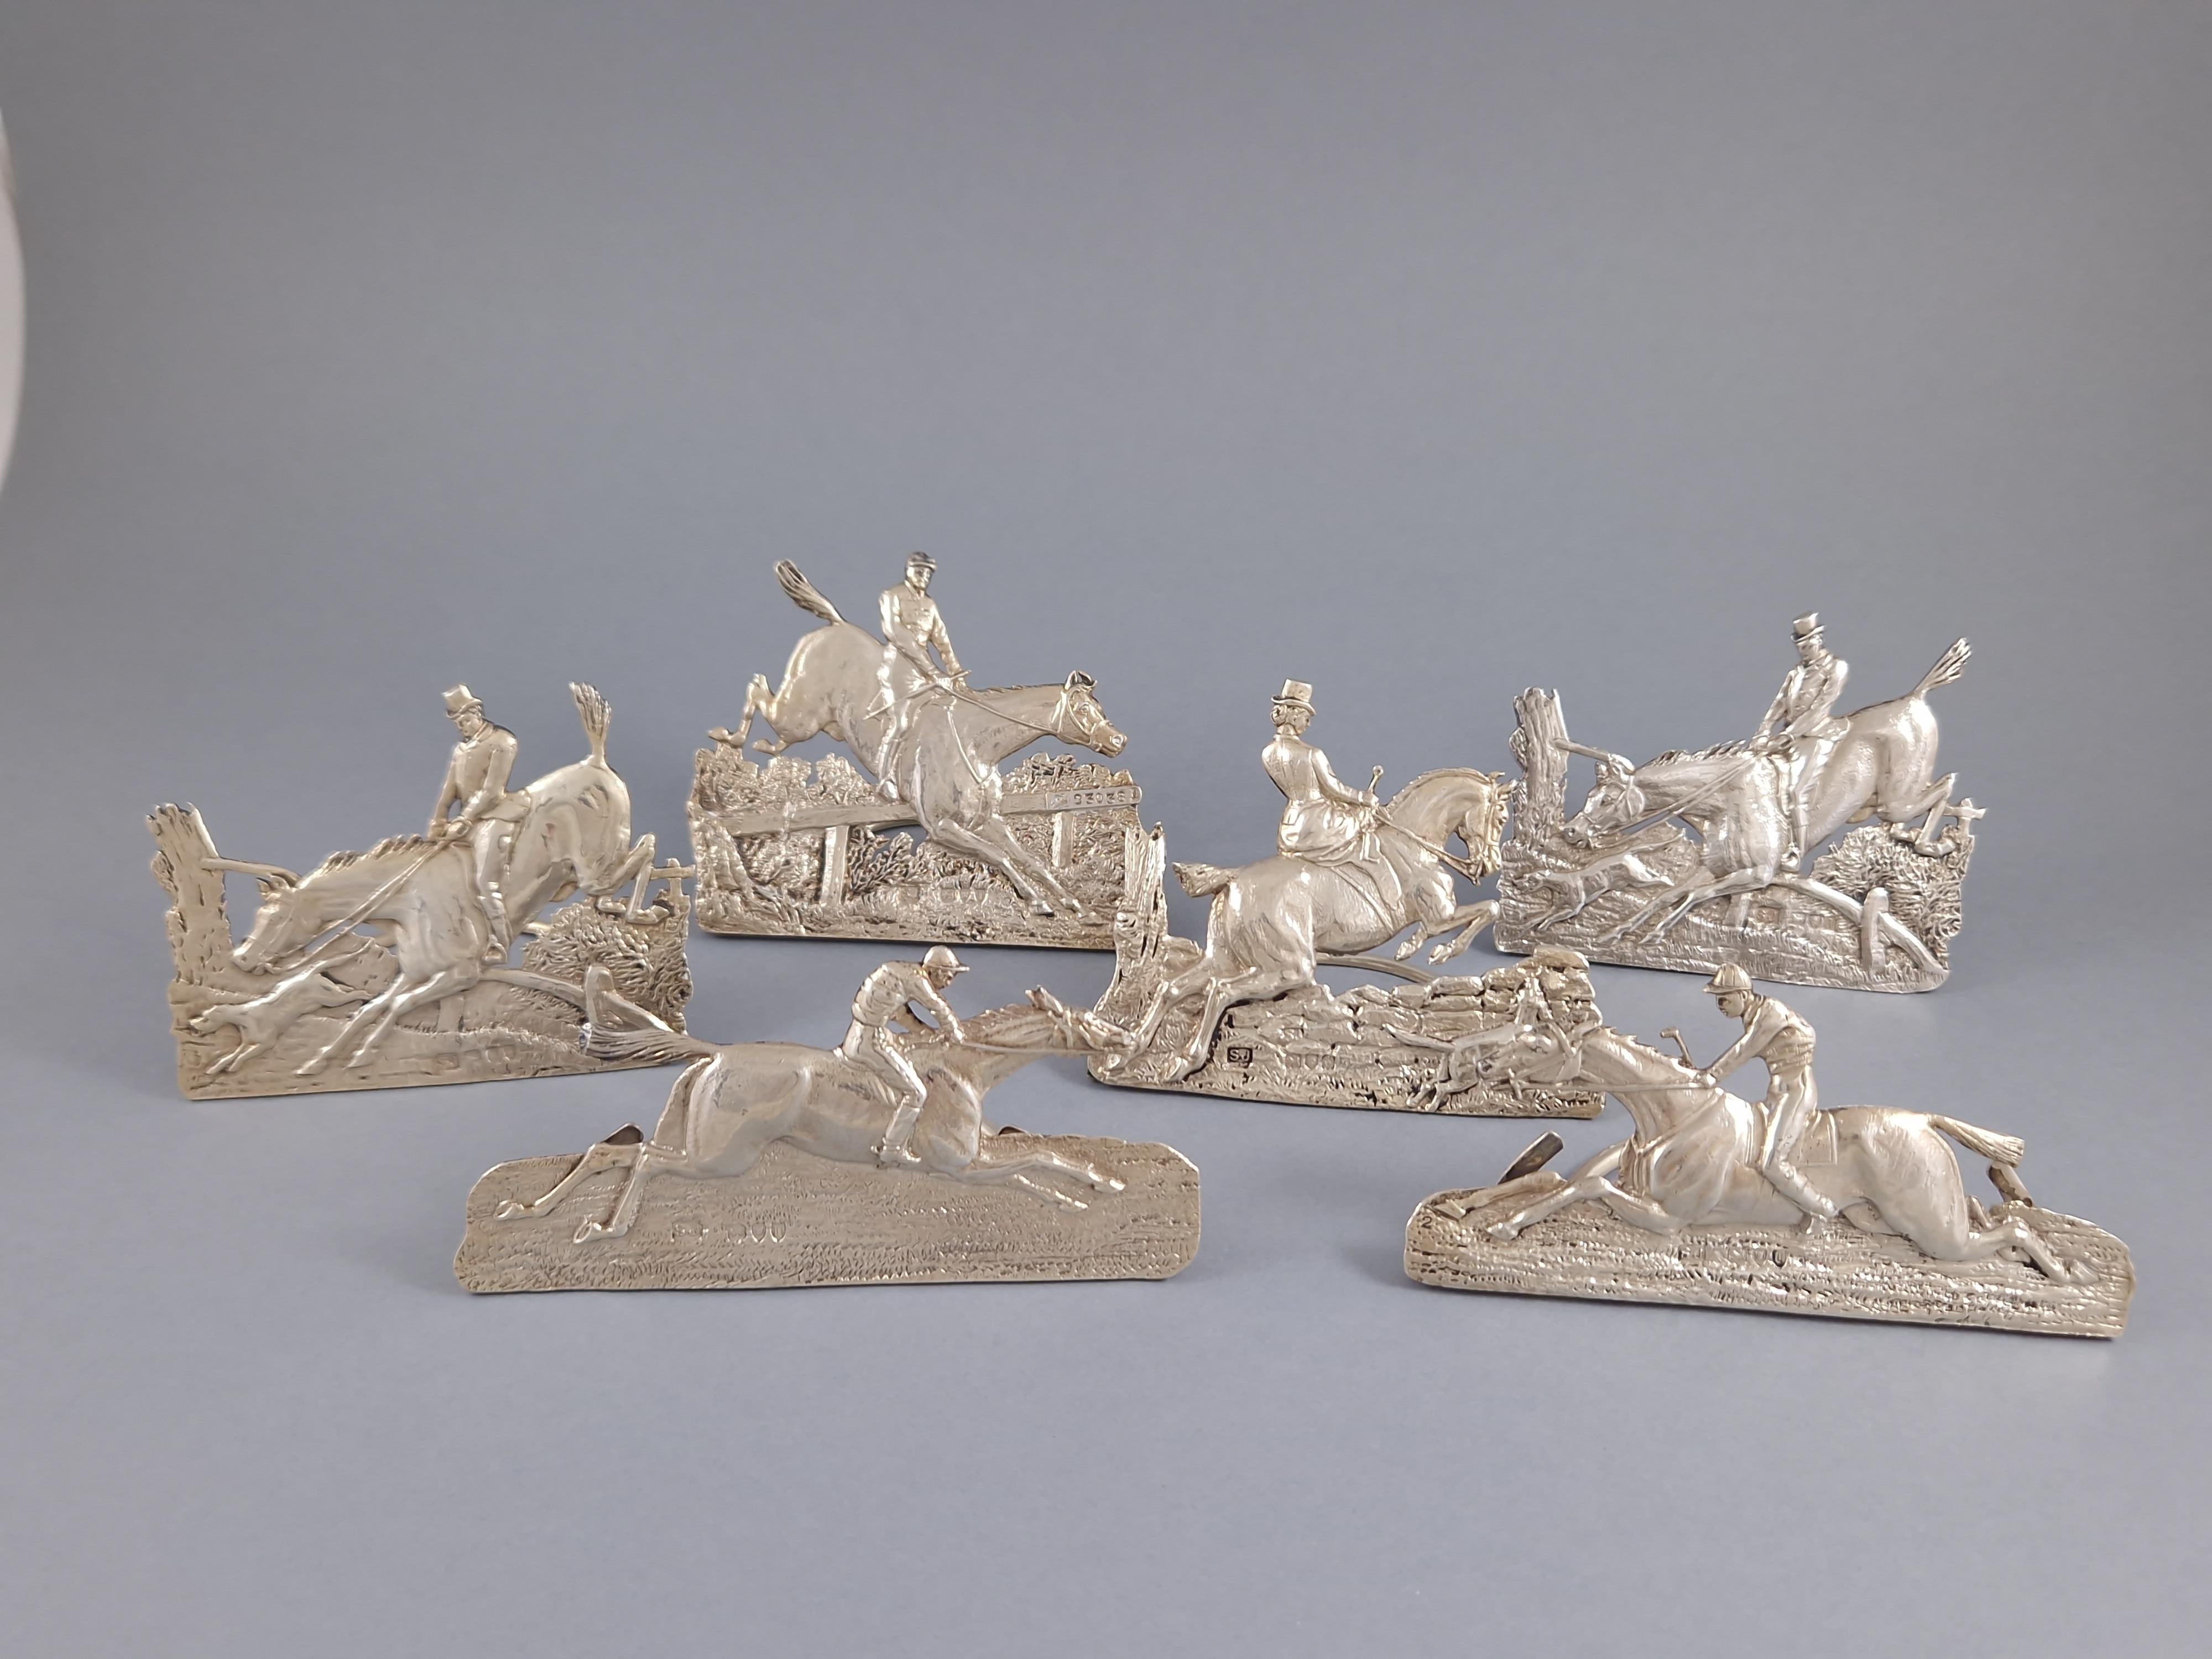 Beautiful set of 6 Sterling Silver place card or menu holder horse
Made by Samuel Jacob in London
Letter date 2 A for 1896, 2T for 1894 and 2 U for 1895
Length between 7.6 and 10.3 cm
Height between 4.8 and 6. 7 cm
Weight: 267 grams
In very good